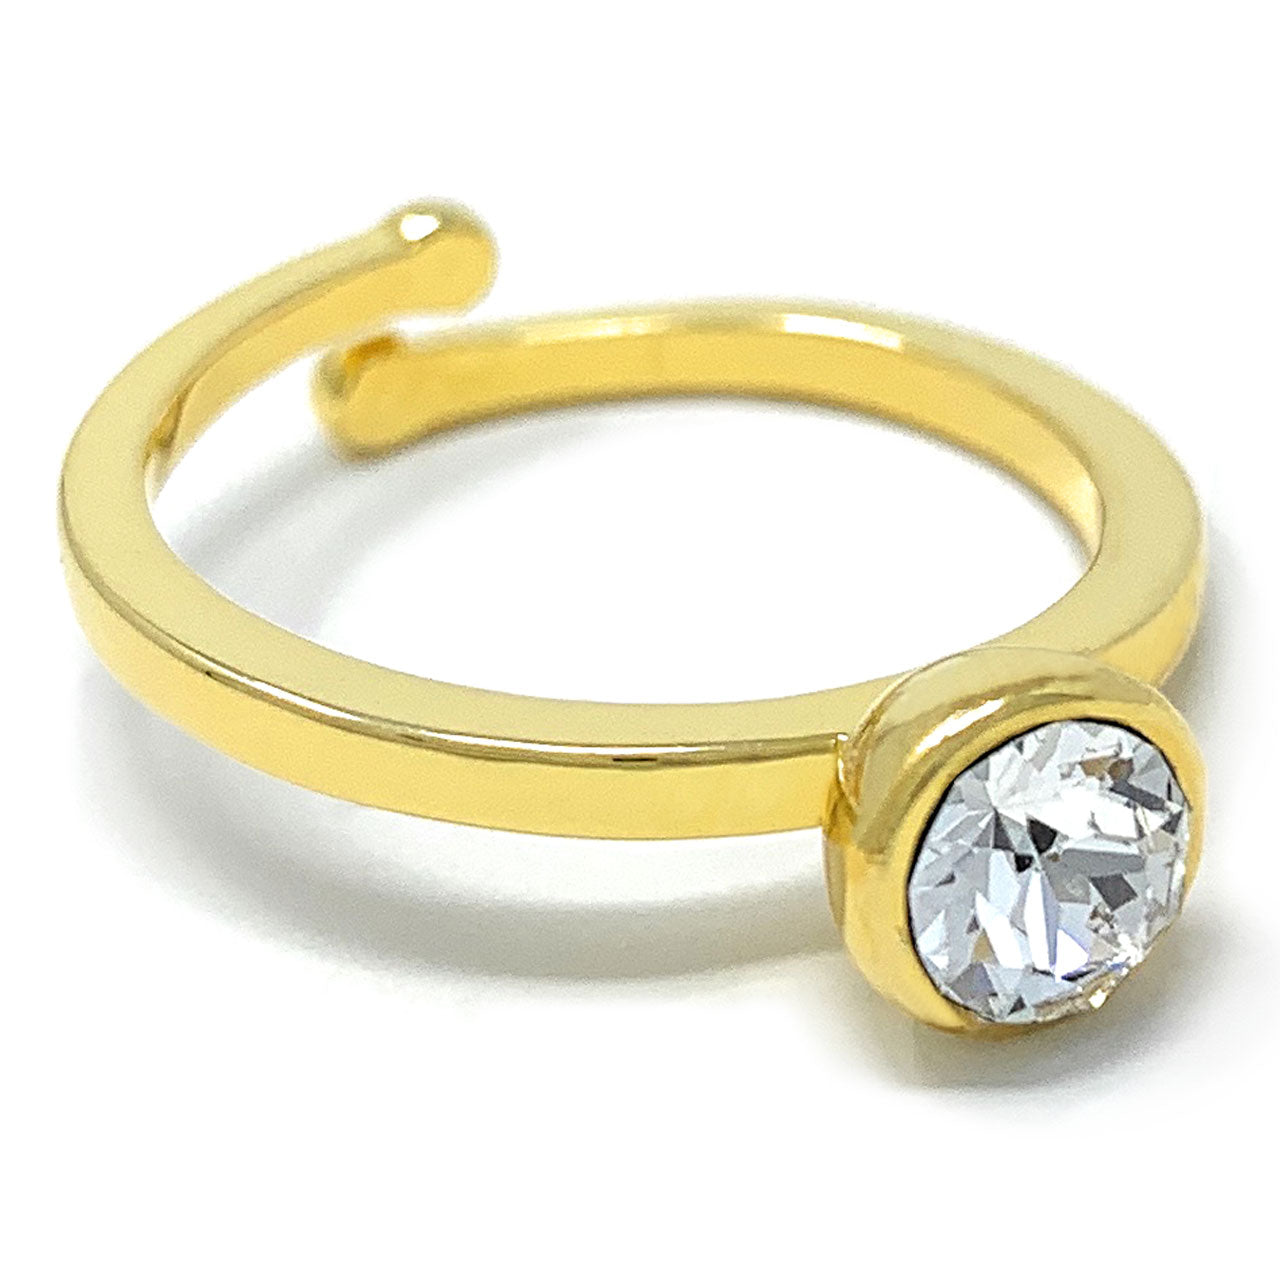 Harley Adjustable Ring with White Clear Round Crystals from Swarovski Gold Plated - Ed Heart